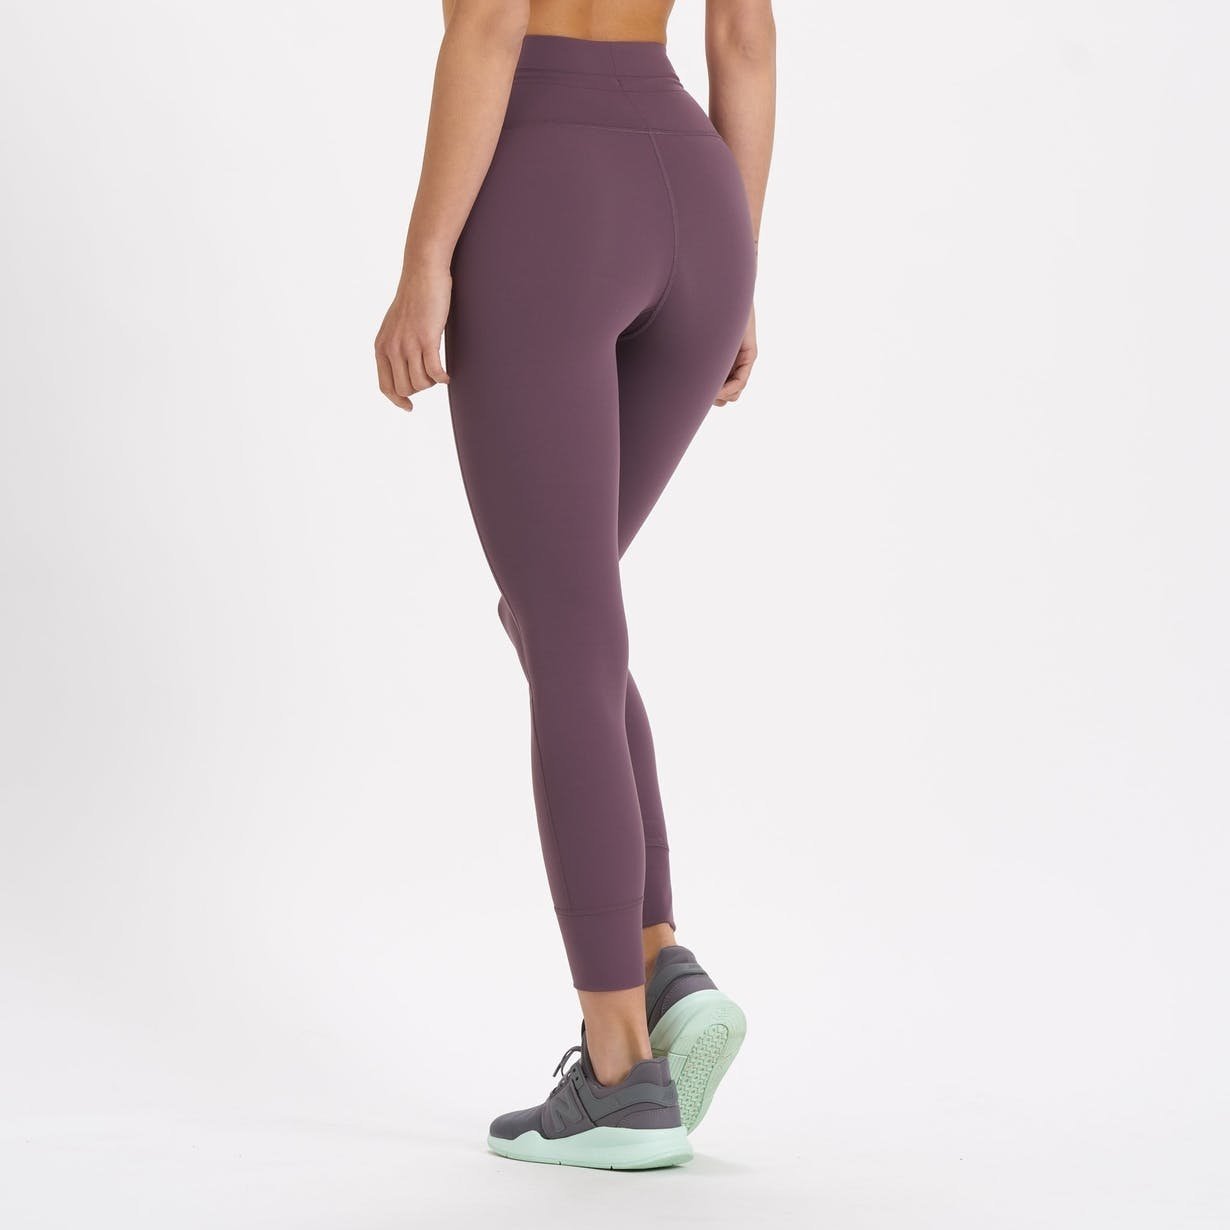 Vuori leggings, tops, outerwear and more to add to your wardrobe - Good  Morning America